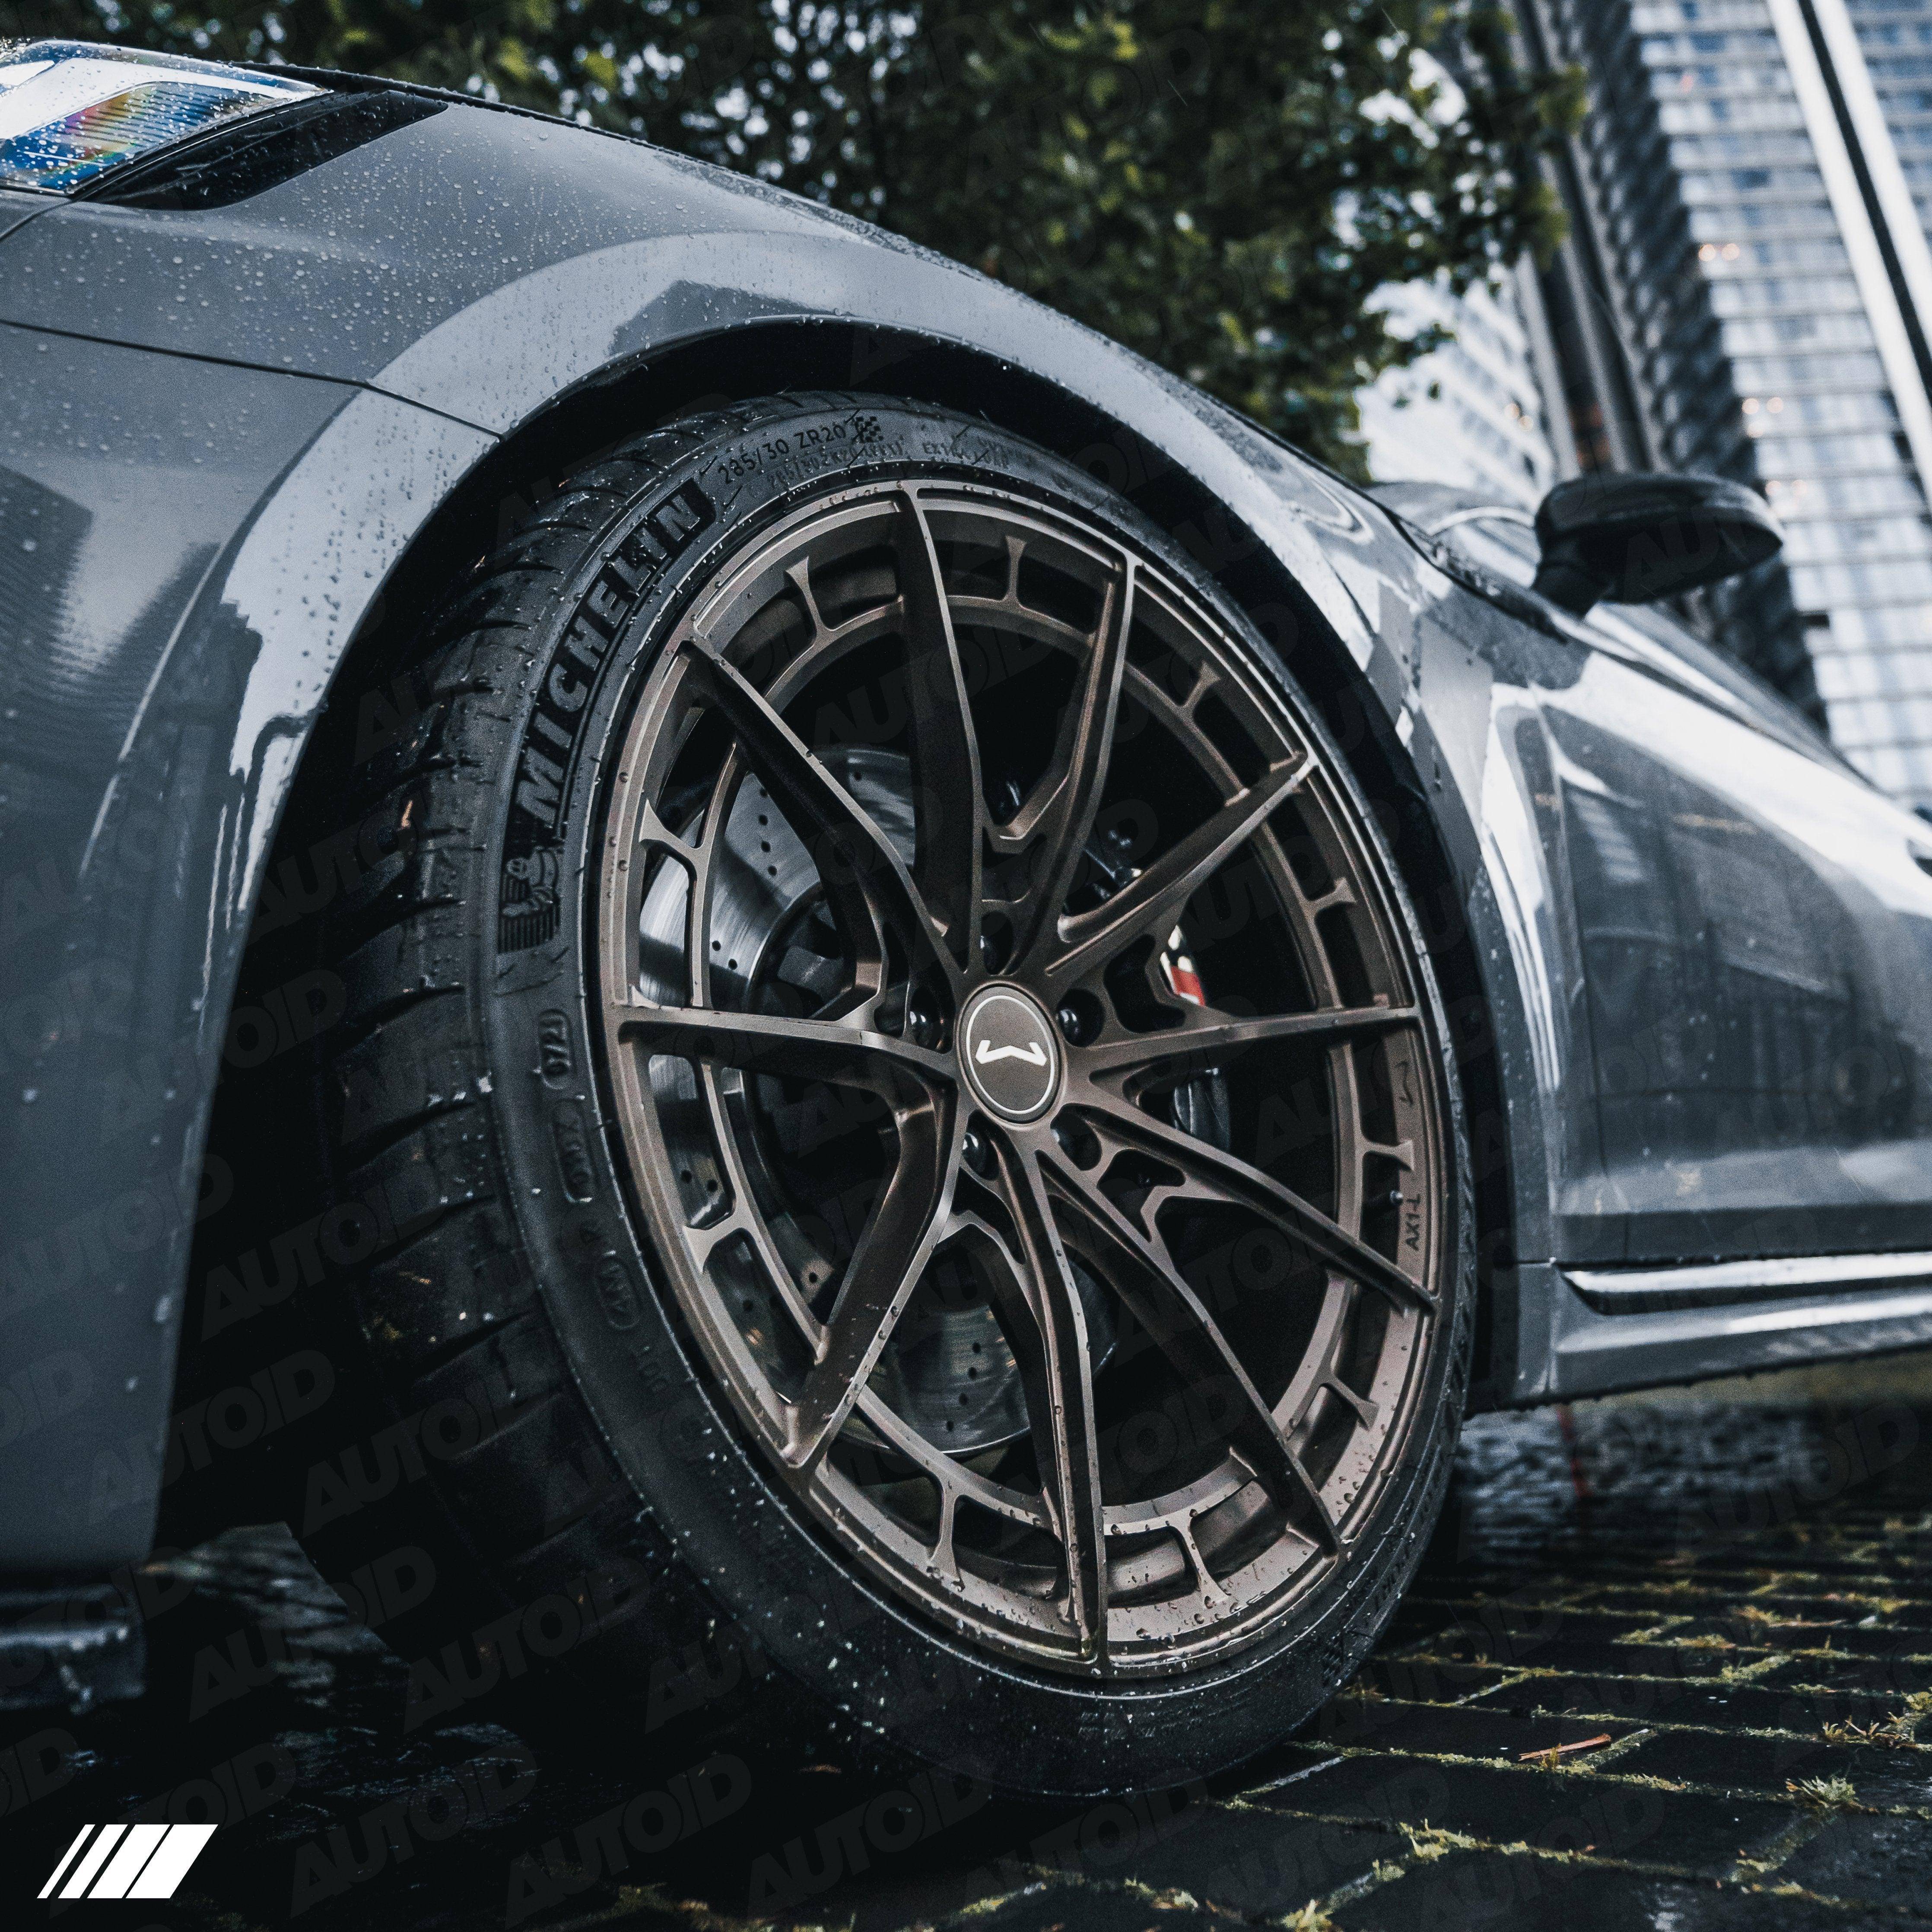 Dillinger AX1 L Forged Wheels, Forged Wheels, Dillinger Wheels - AUTOID | Premium Automotive Accessories